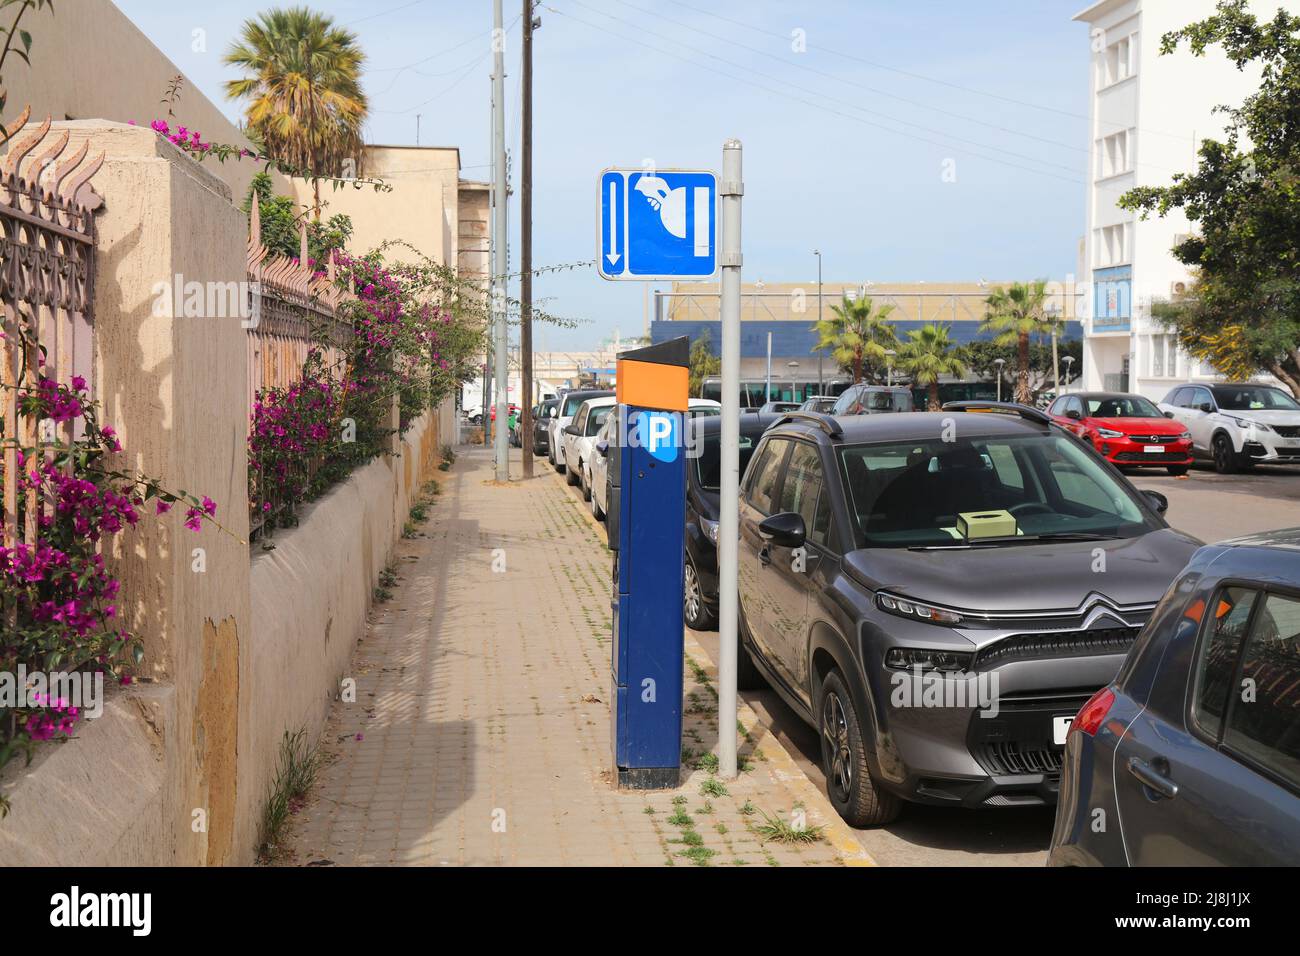 CASABLANCA, MOROCCO - FEBRUARY 22, 2022: Parking meter in downtown Casablanca, Morocco. Casablanca is the largest city of Morocco. Stock Photo